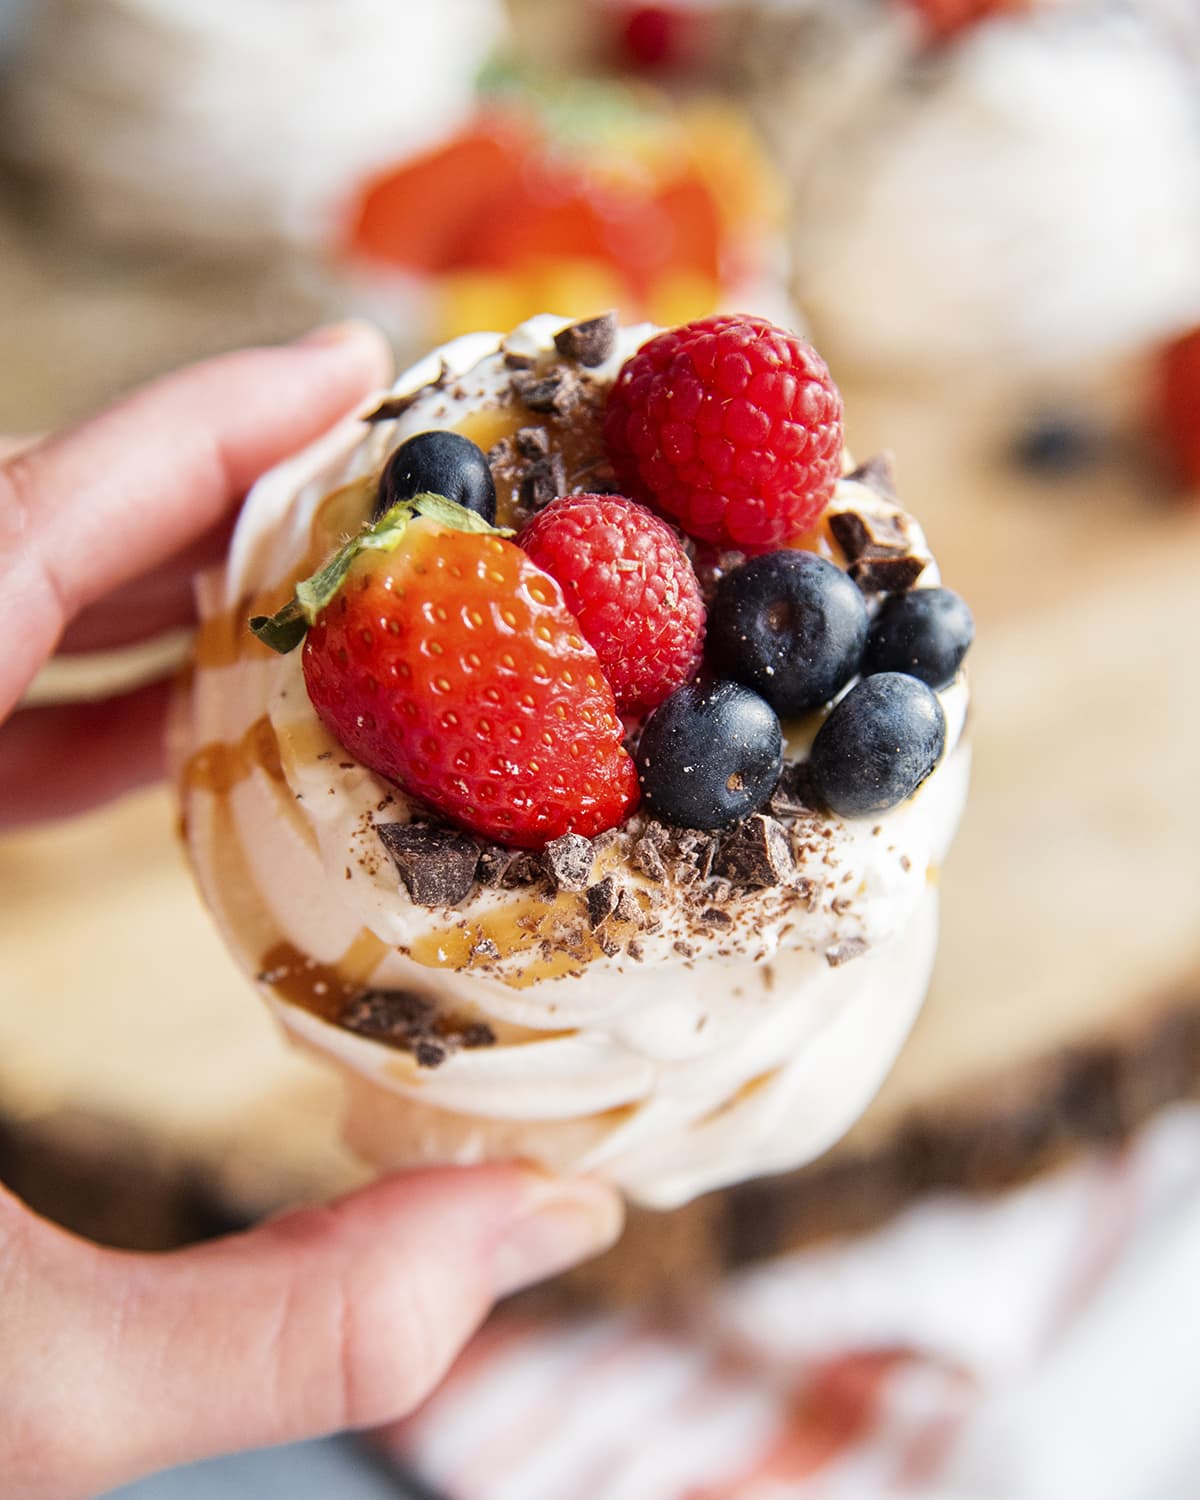 A hand holding a mini pavlova topped with caramel strup and fresh berries.